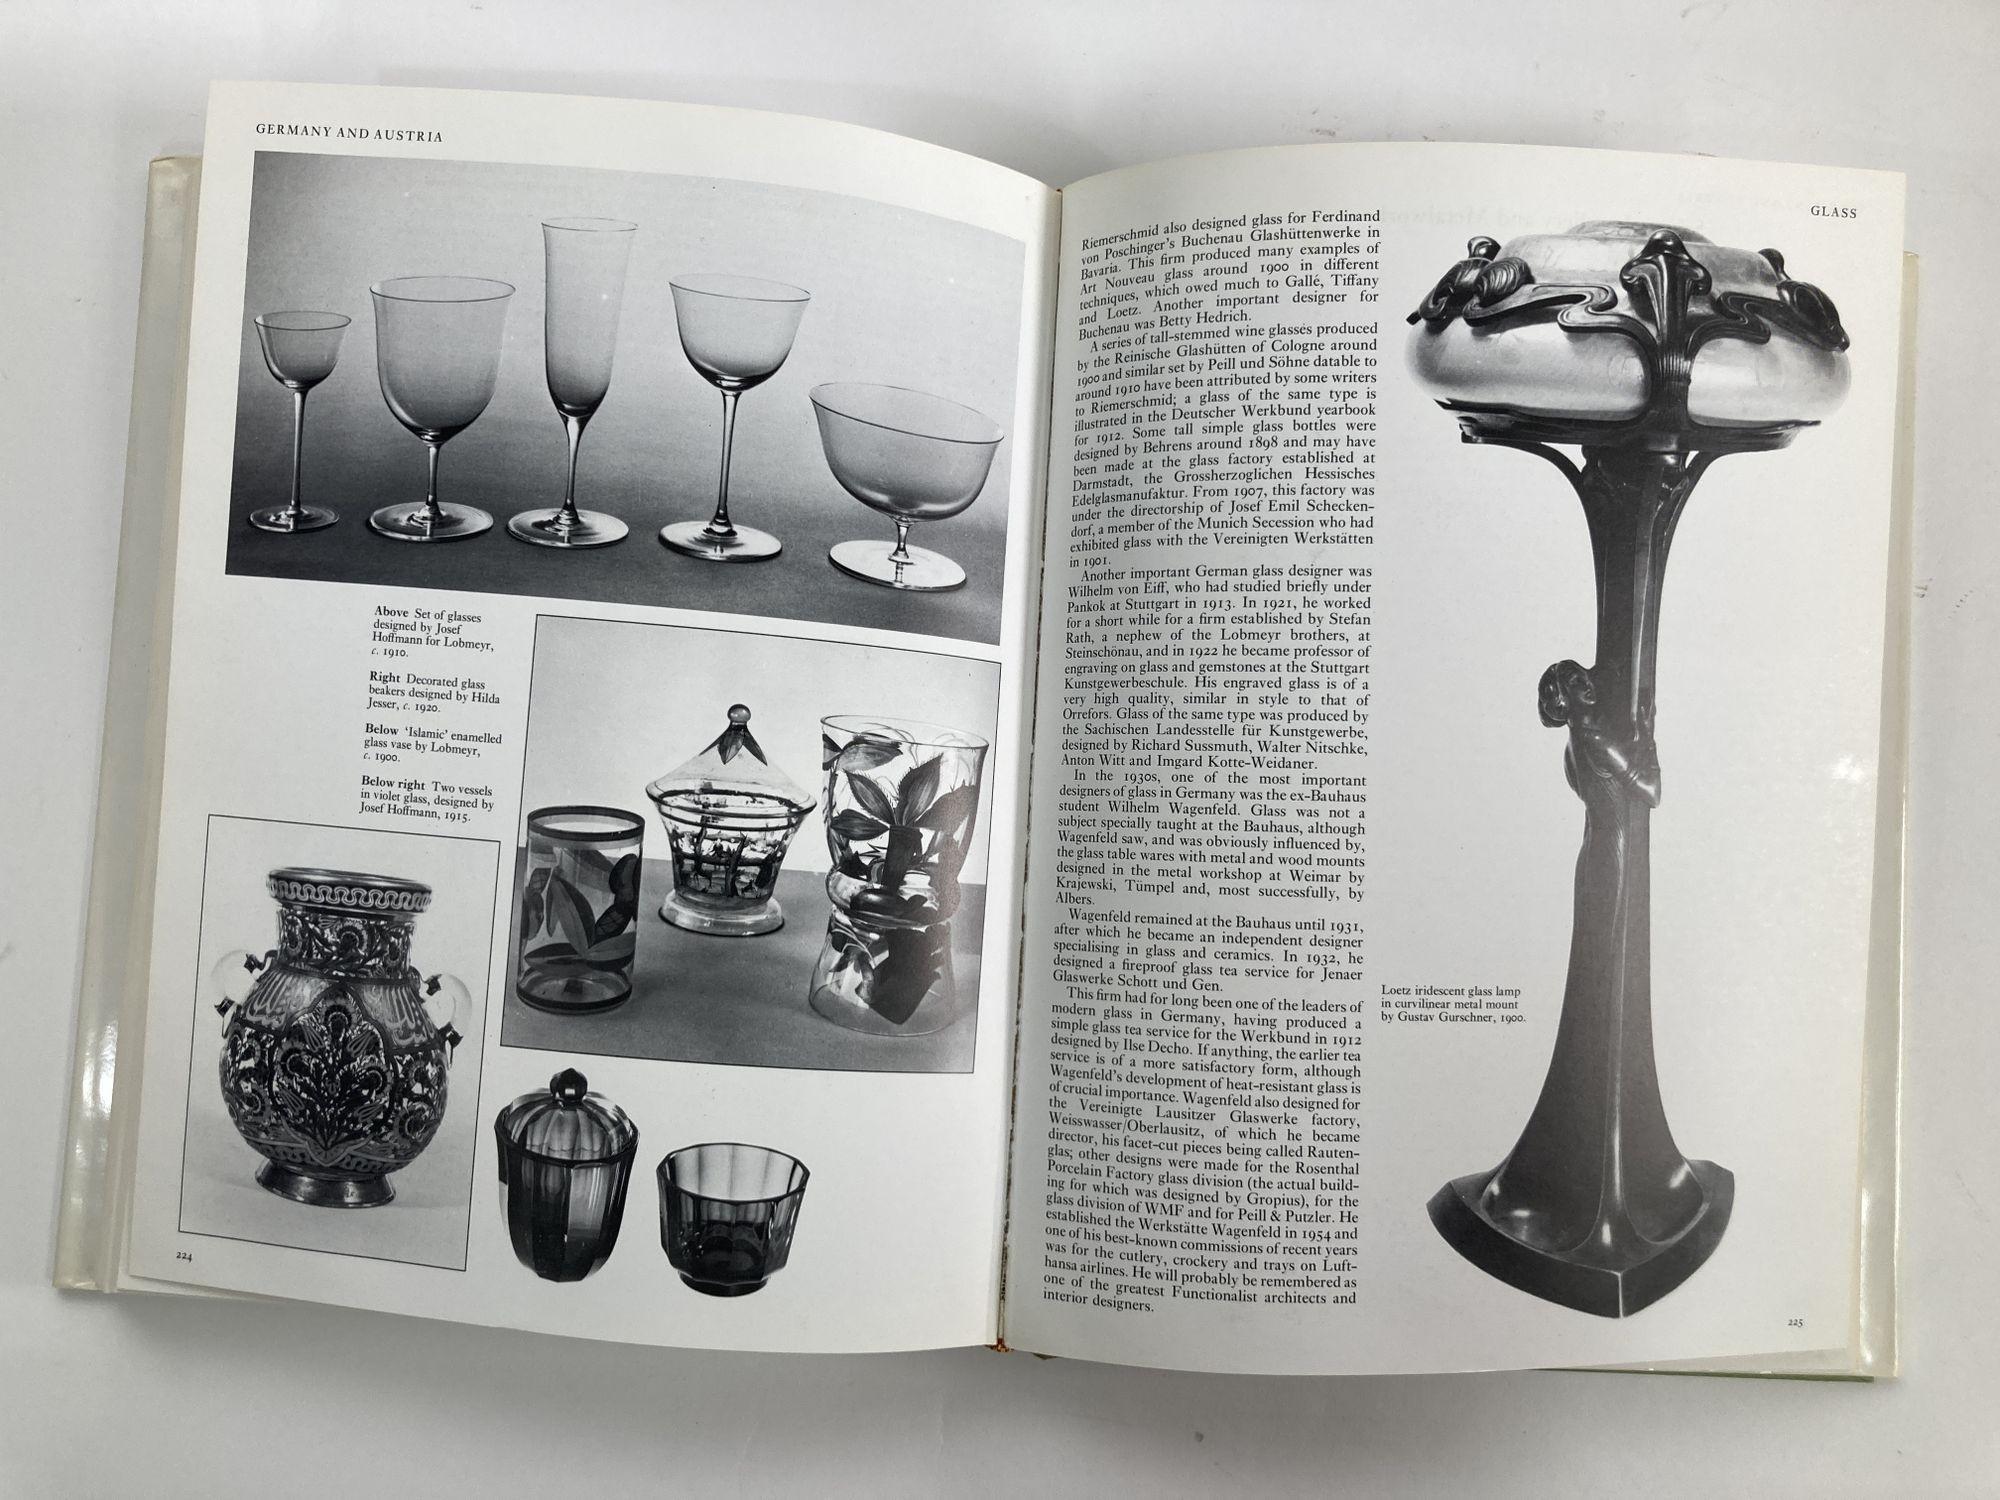 Encyclopedia of Decorative Arts, 1890-1940 1st Edition 1978 For Sale 6